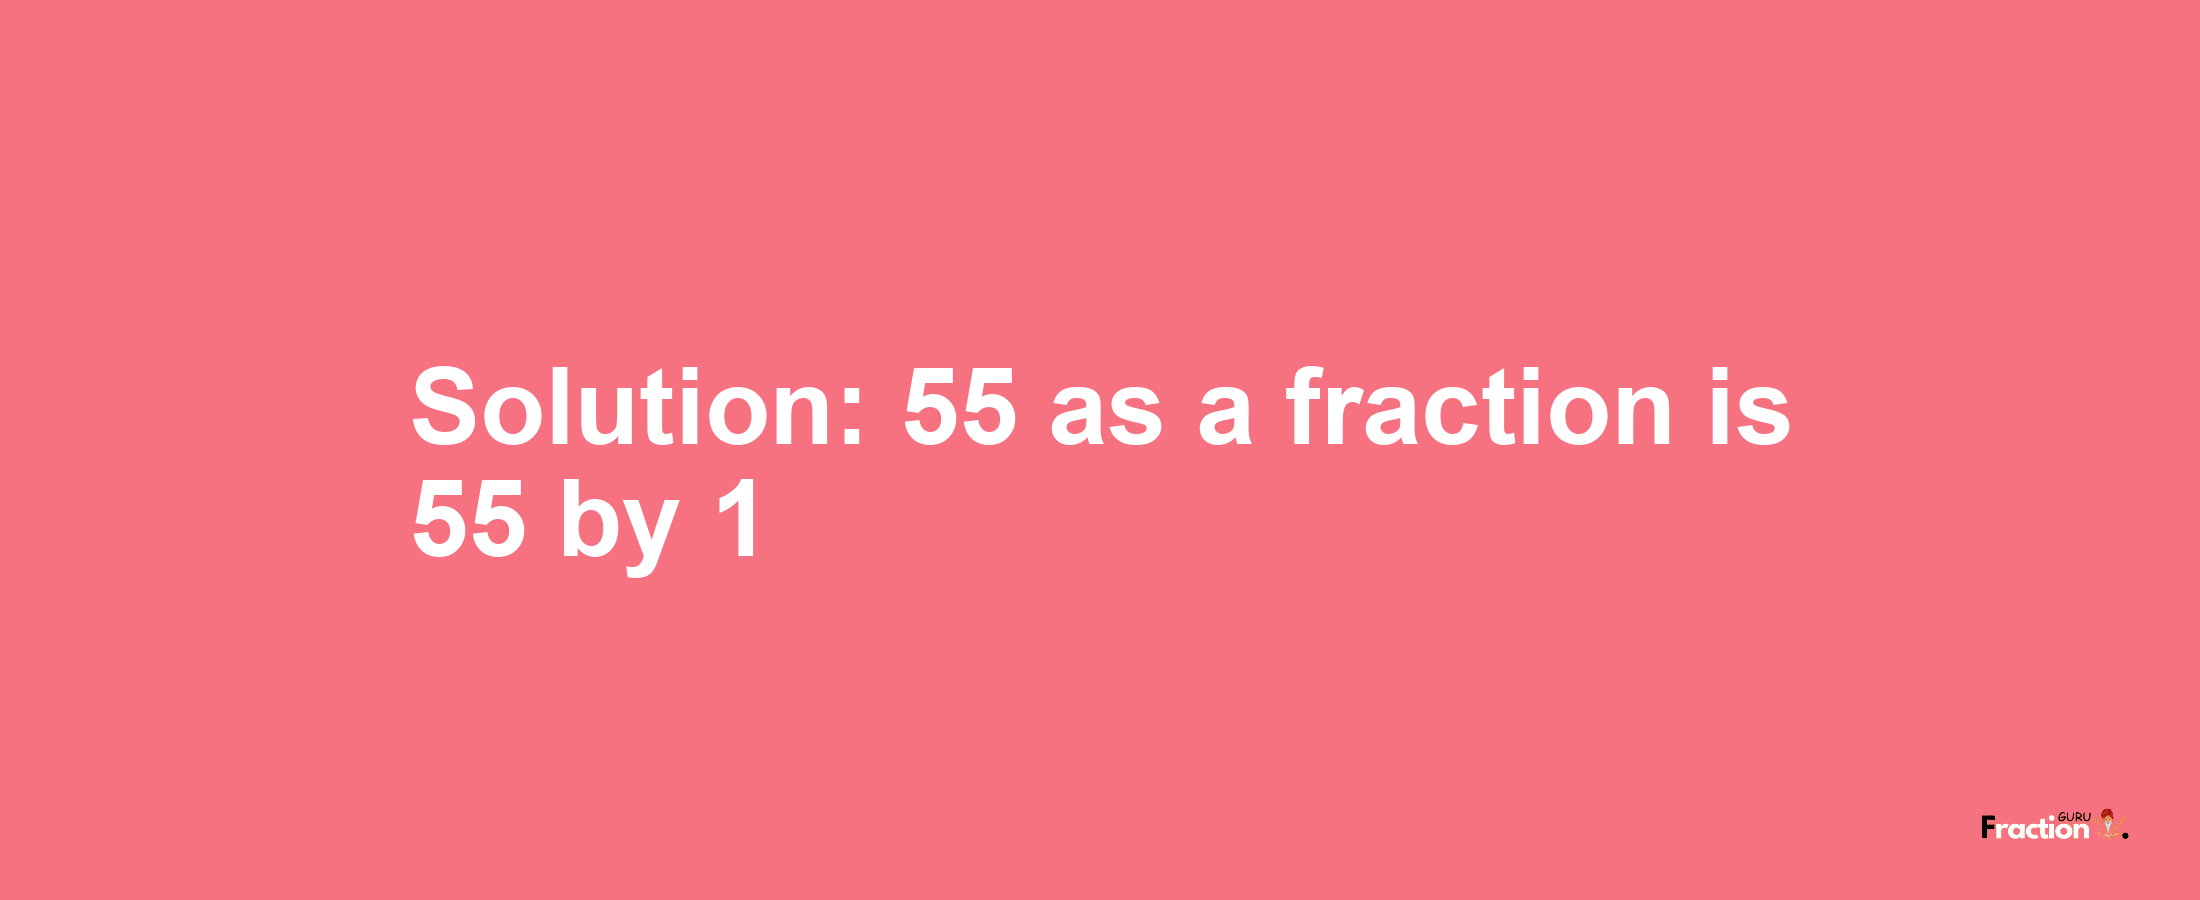 Solution:55 as a fraction is 55/1